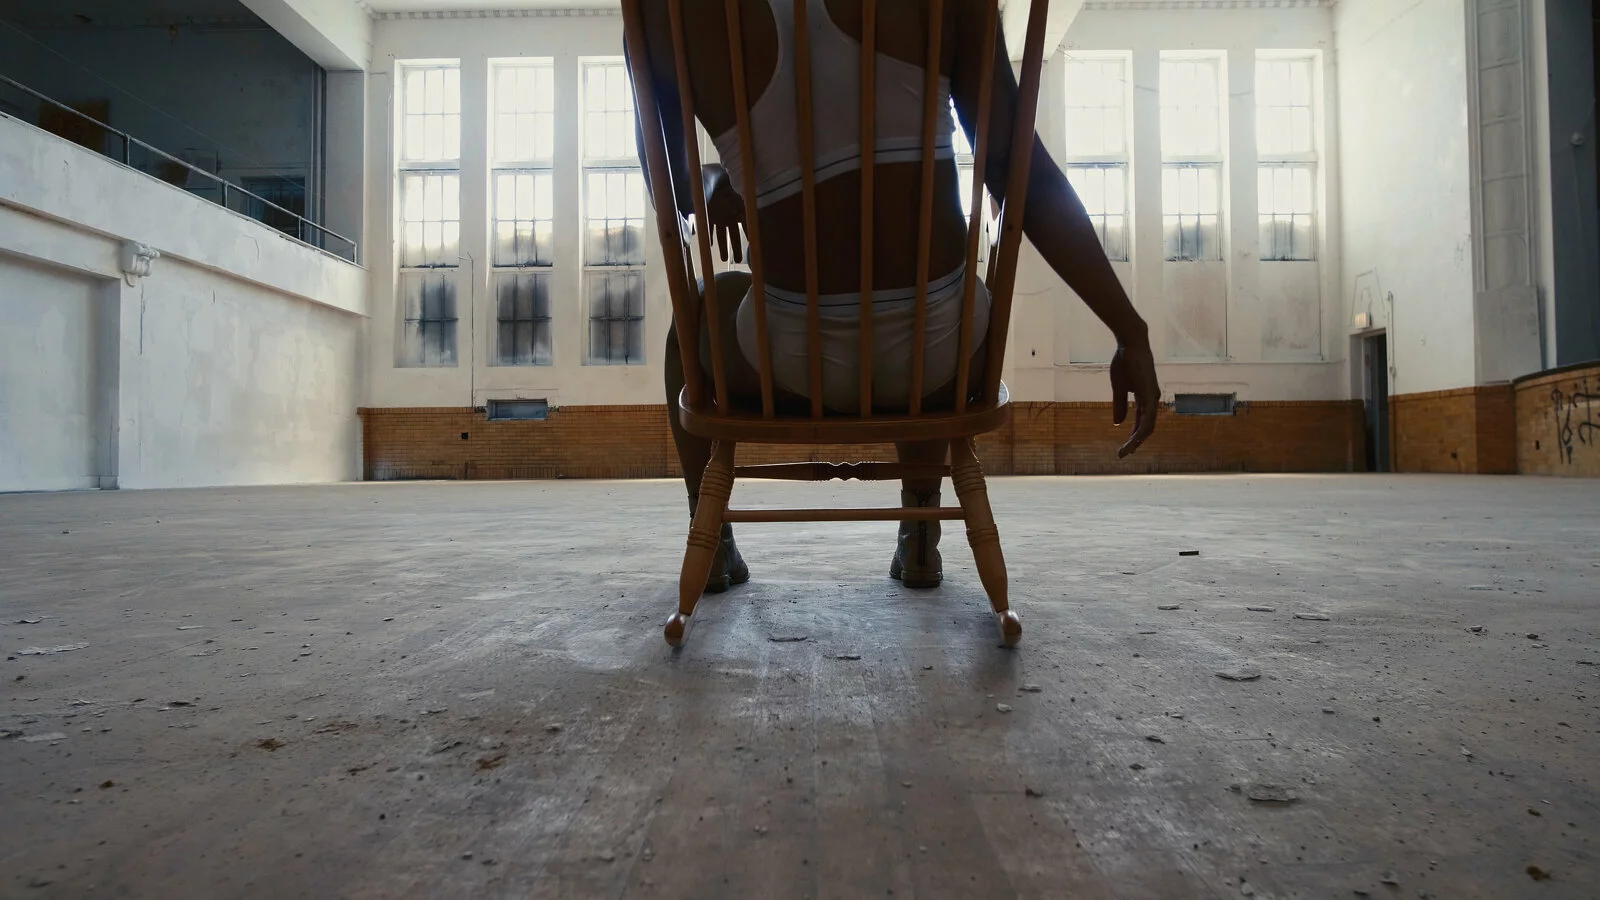 Wide-angled shot of a person, pictured from the shoulders down, sitting in a wooden chair in an otherwise empty room.